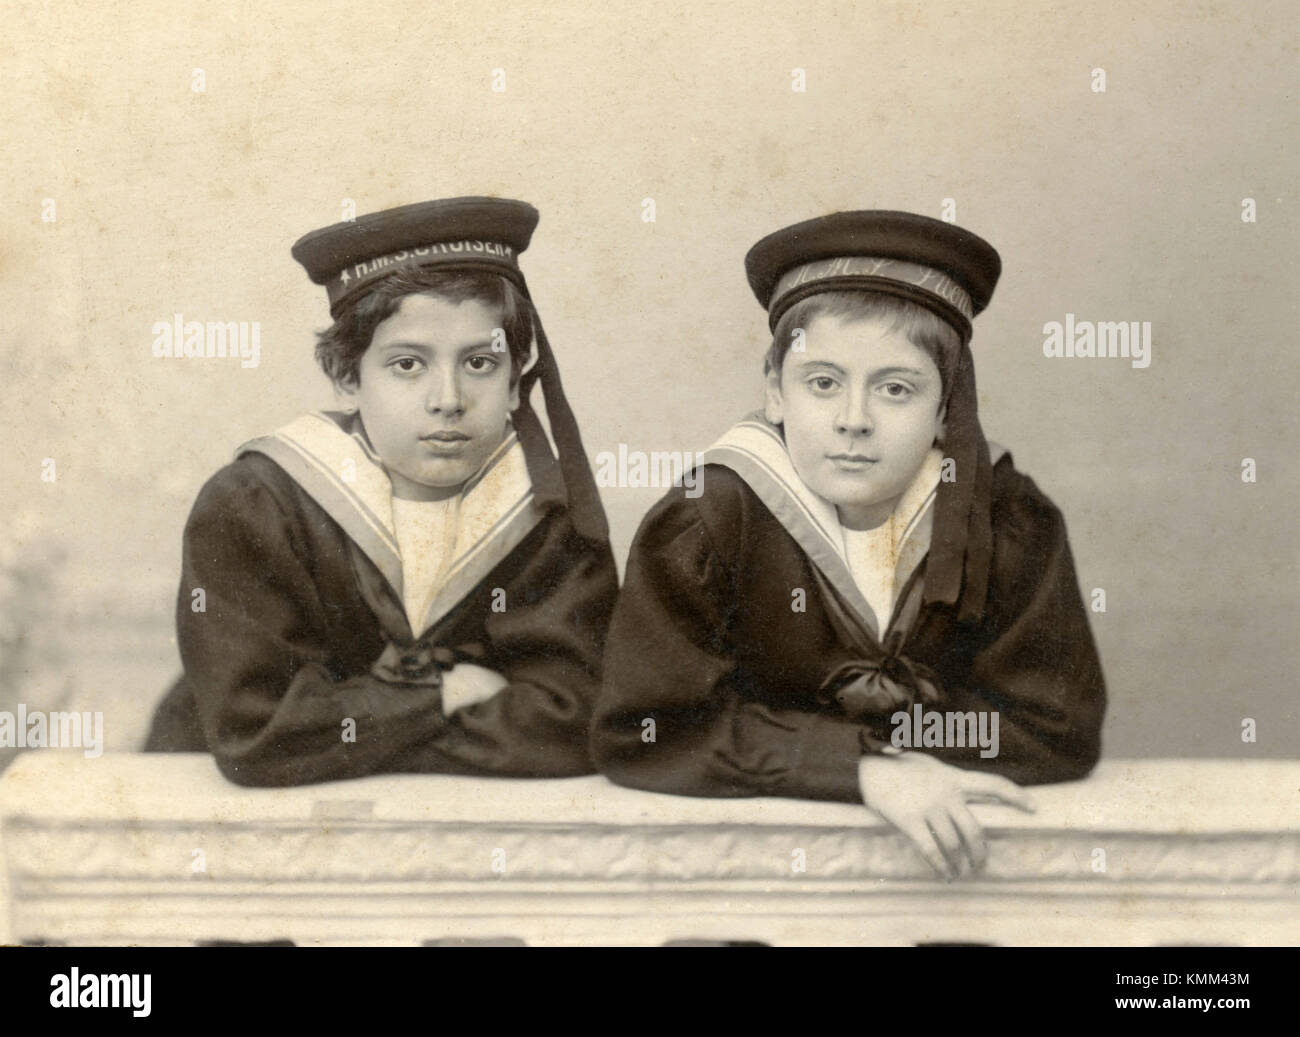 Two boys in sailor suit, Italy 1930s Stock Photo